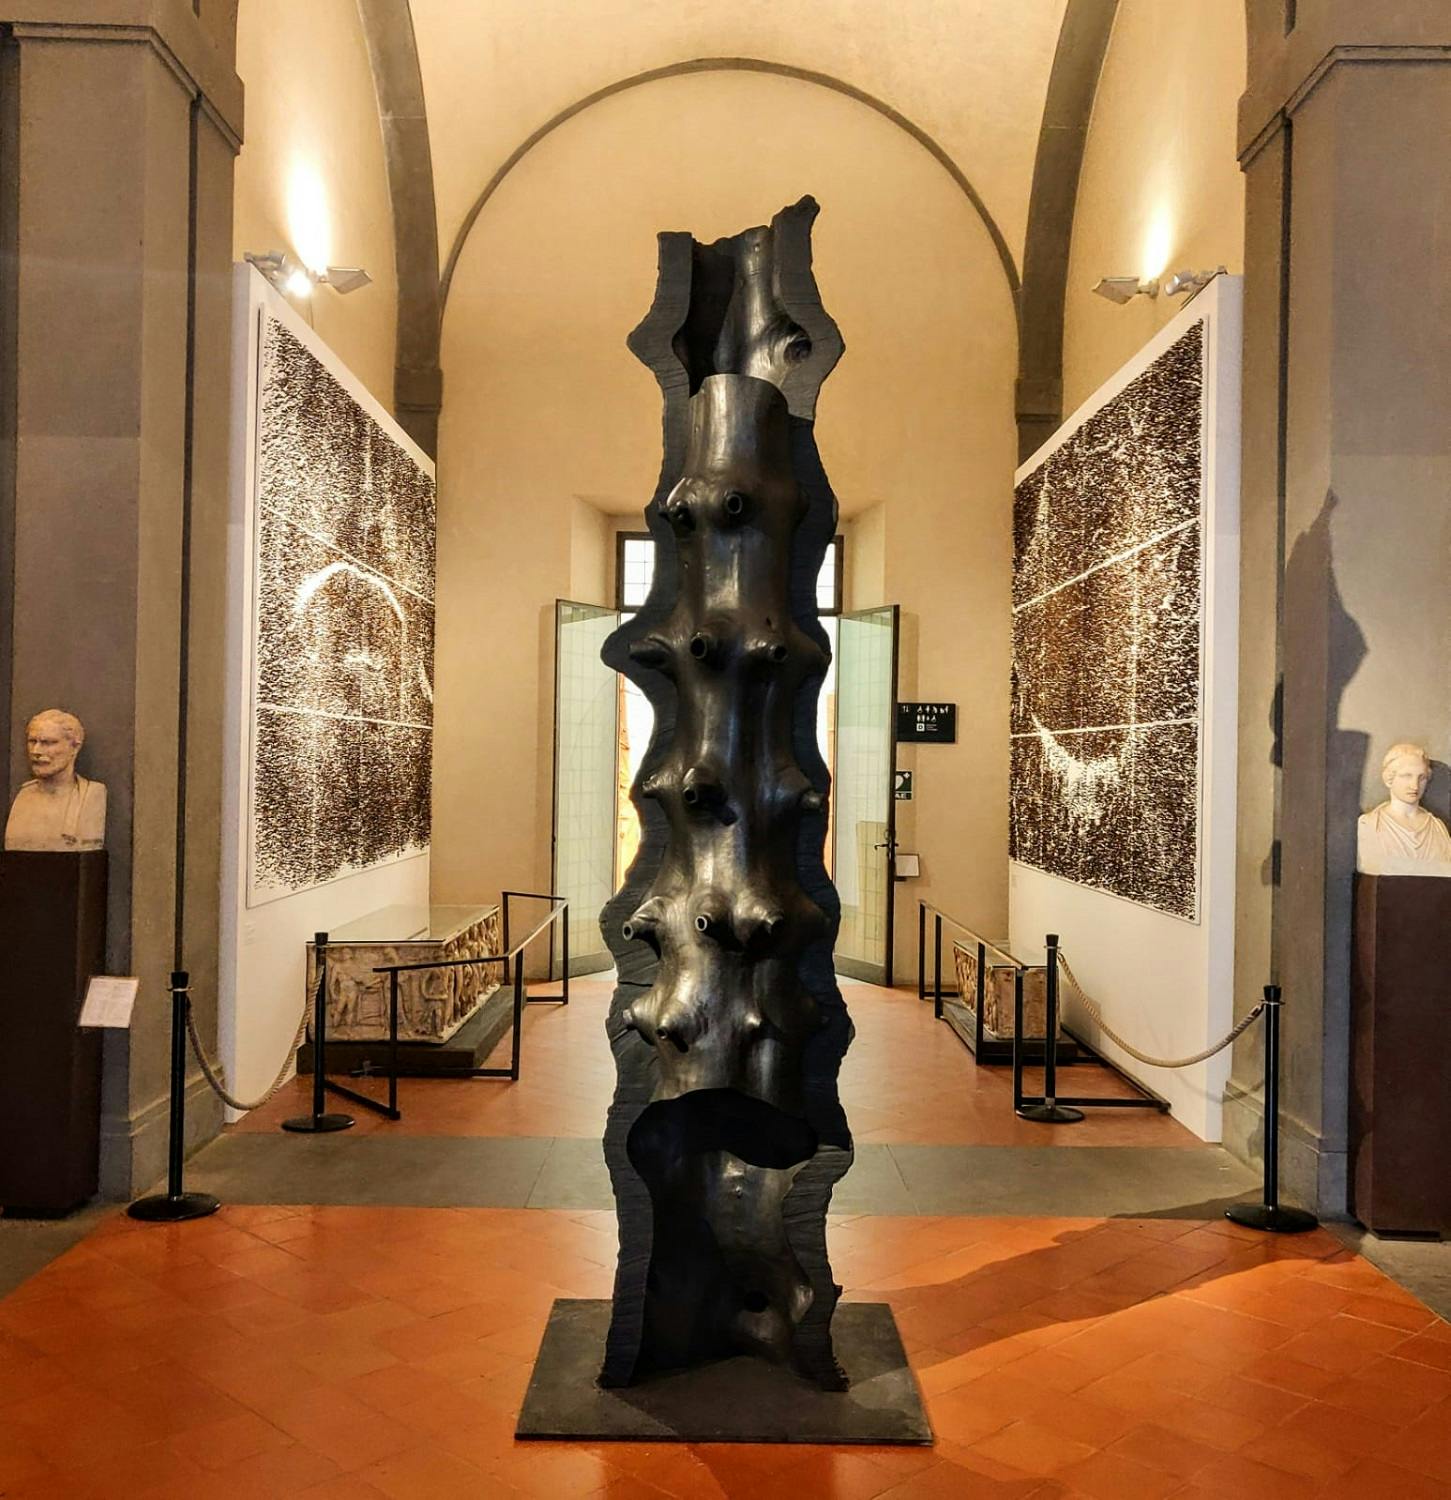 Summer at the Uffizi: opening of the exhibition by Giuseppe Penone